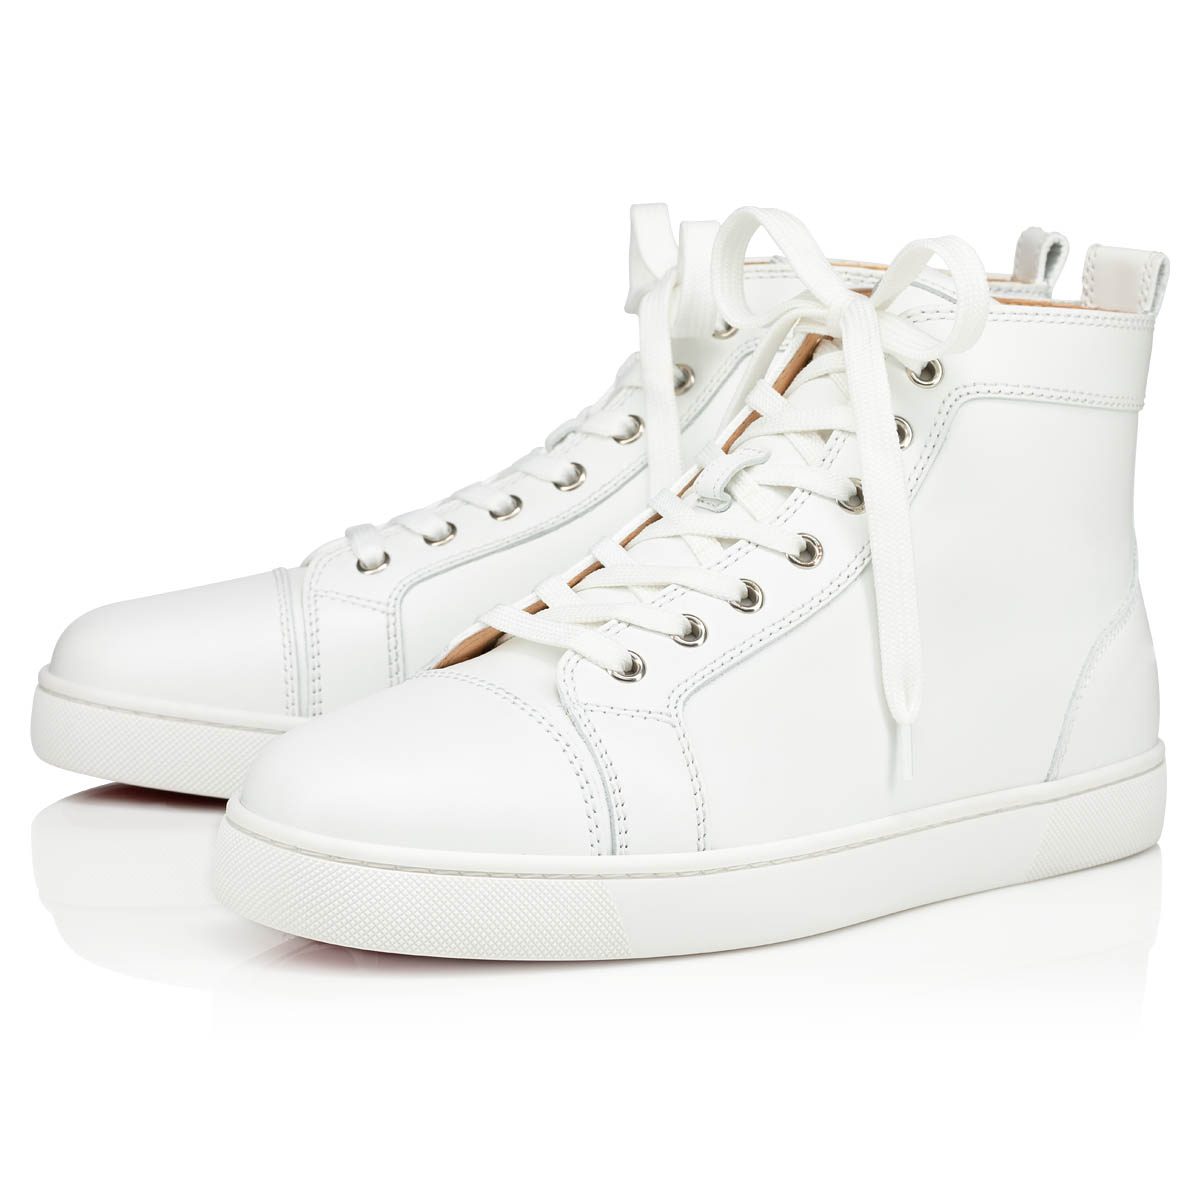 Louis - High-top sneakers - Calf leather - White - Men - Christian ...